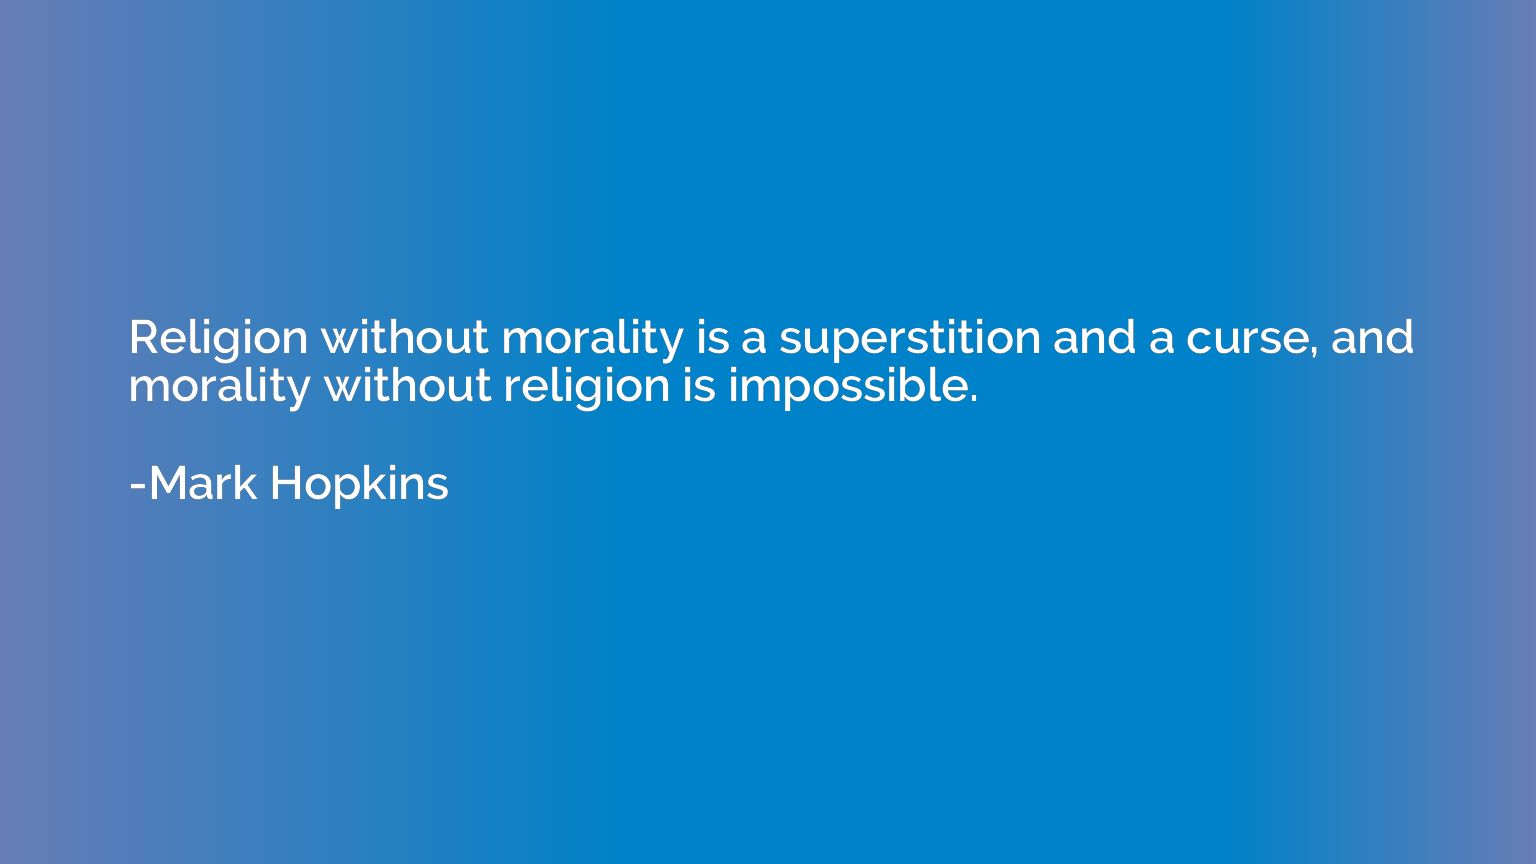 Religion without morality is a superstition and a curse, and